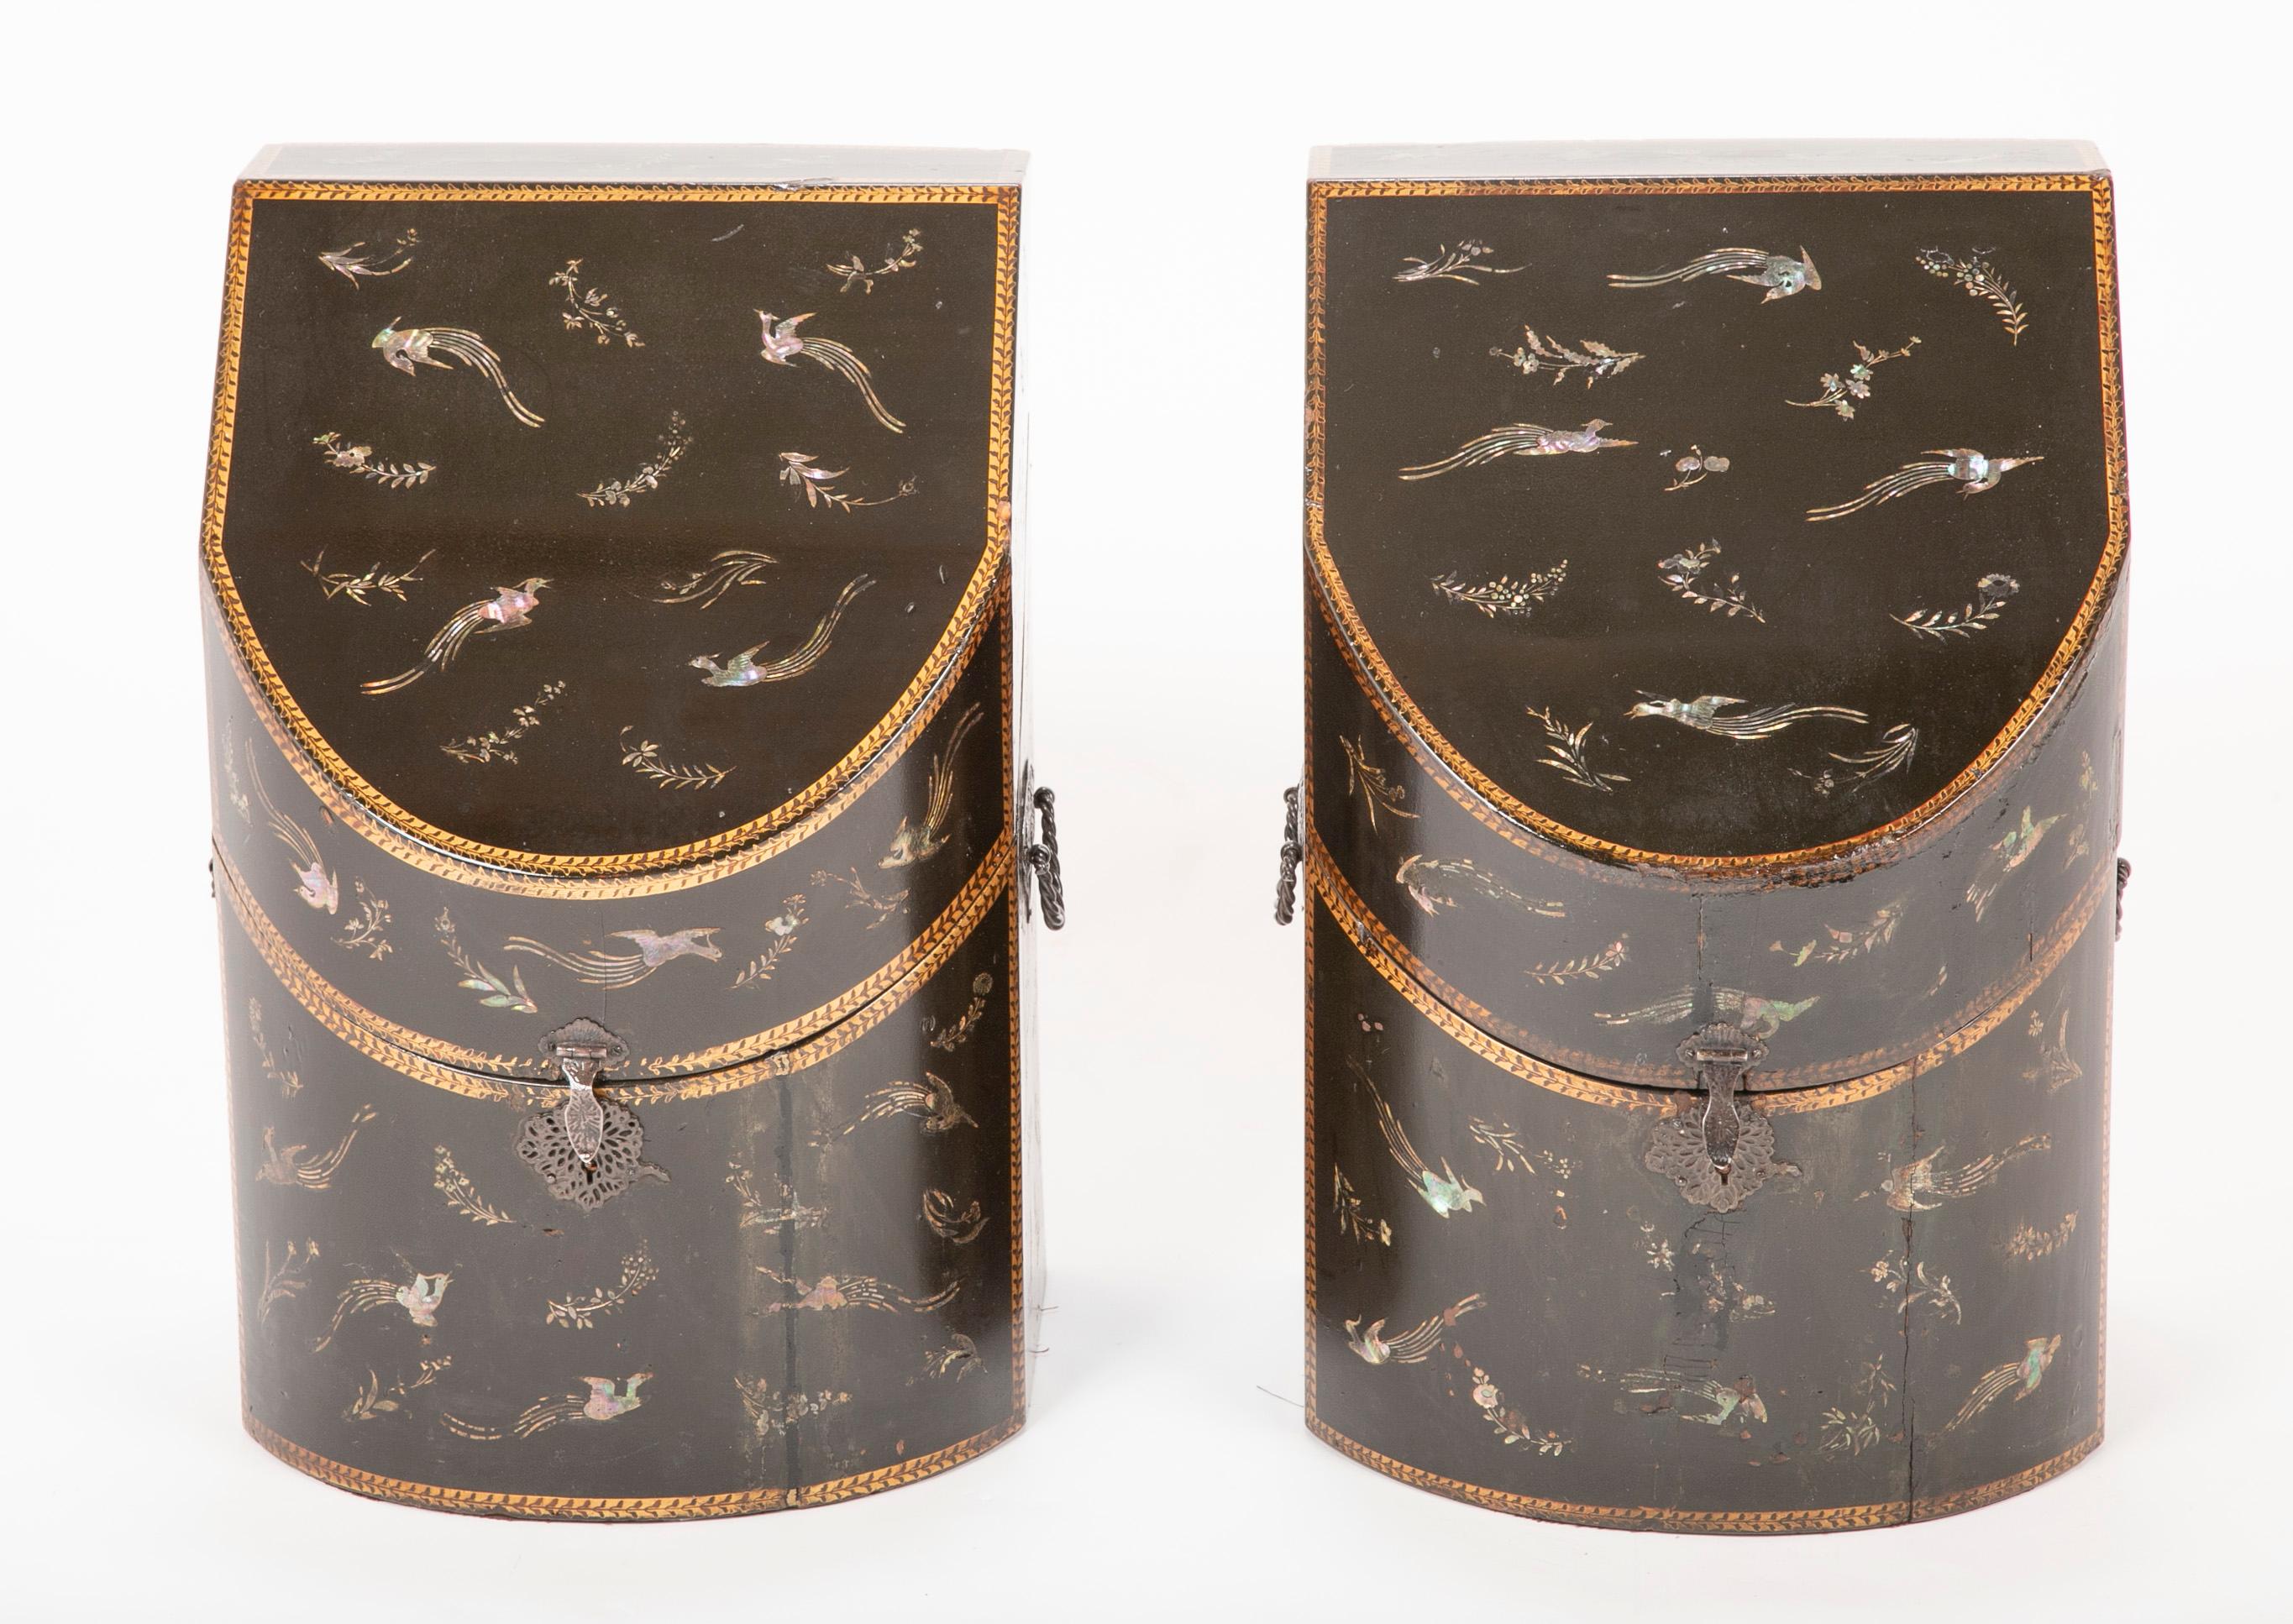 Rare pair of Japanese Nagasaki Export lacquered wood knife boxes with mother-of-pearl inlay of flowers and birds, now converted to letter boxes.  The boxes were converted to letter boxes in the late 19th c. as shown in photograph.
From Sutton Place